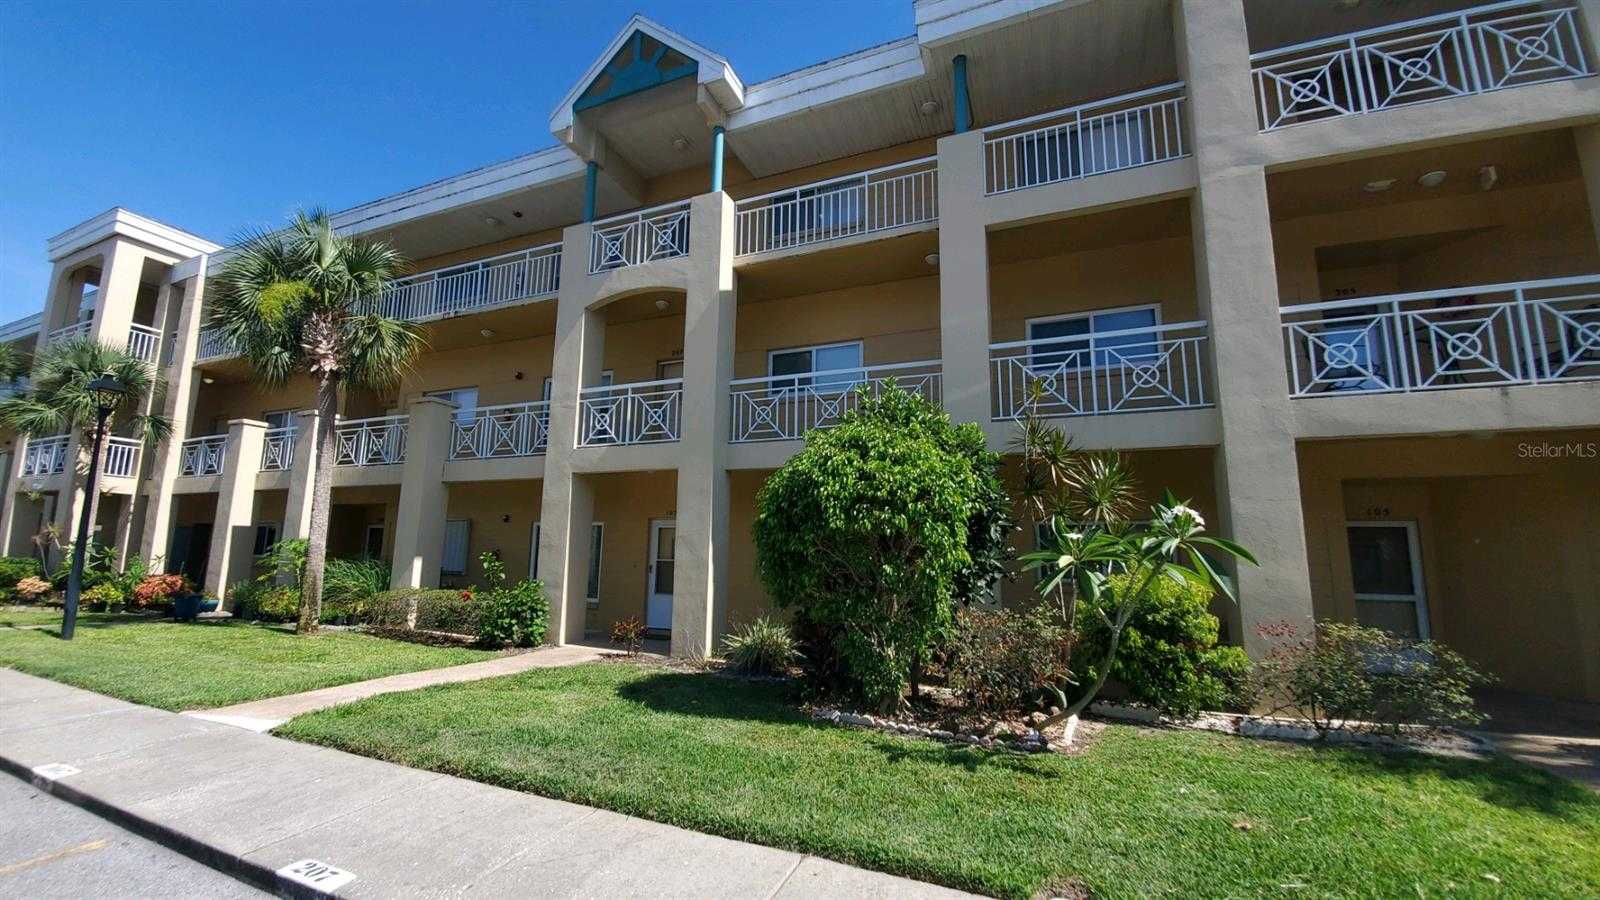 View CLEARWATER, FL 33763 condo